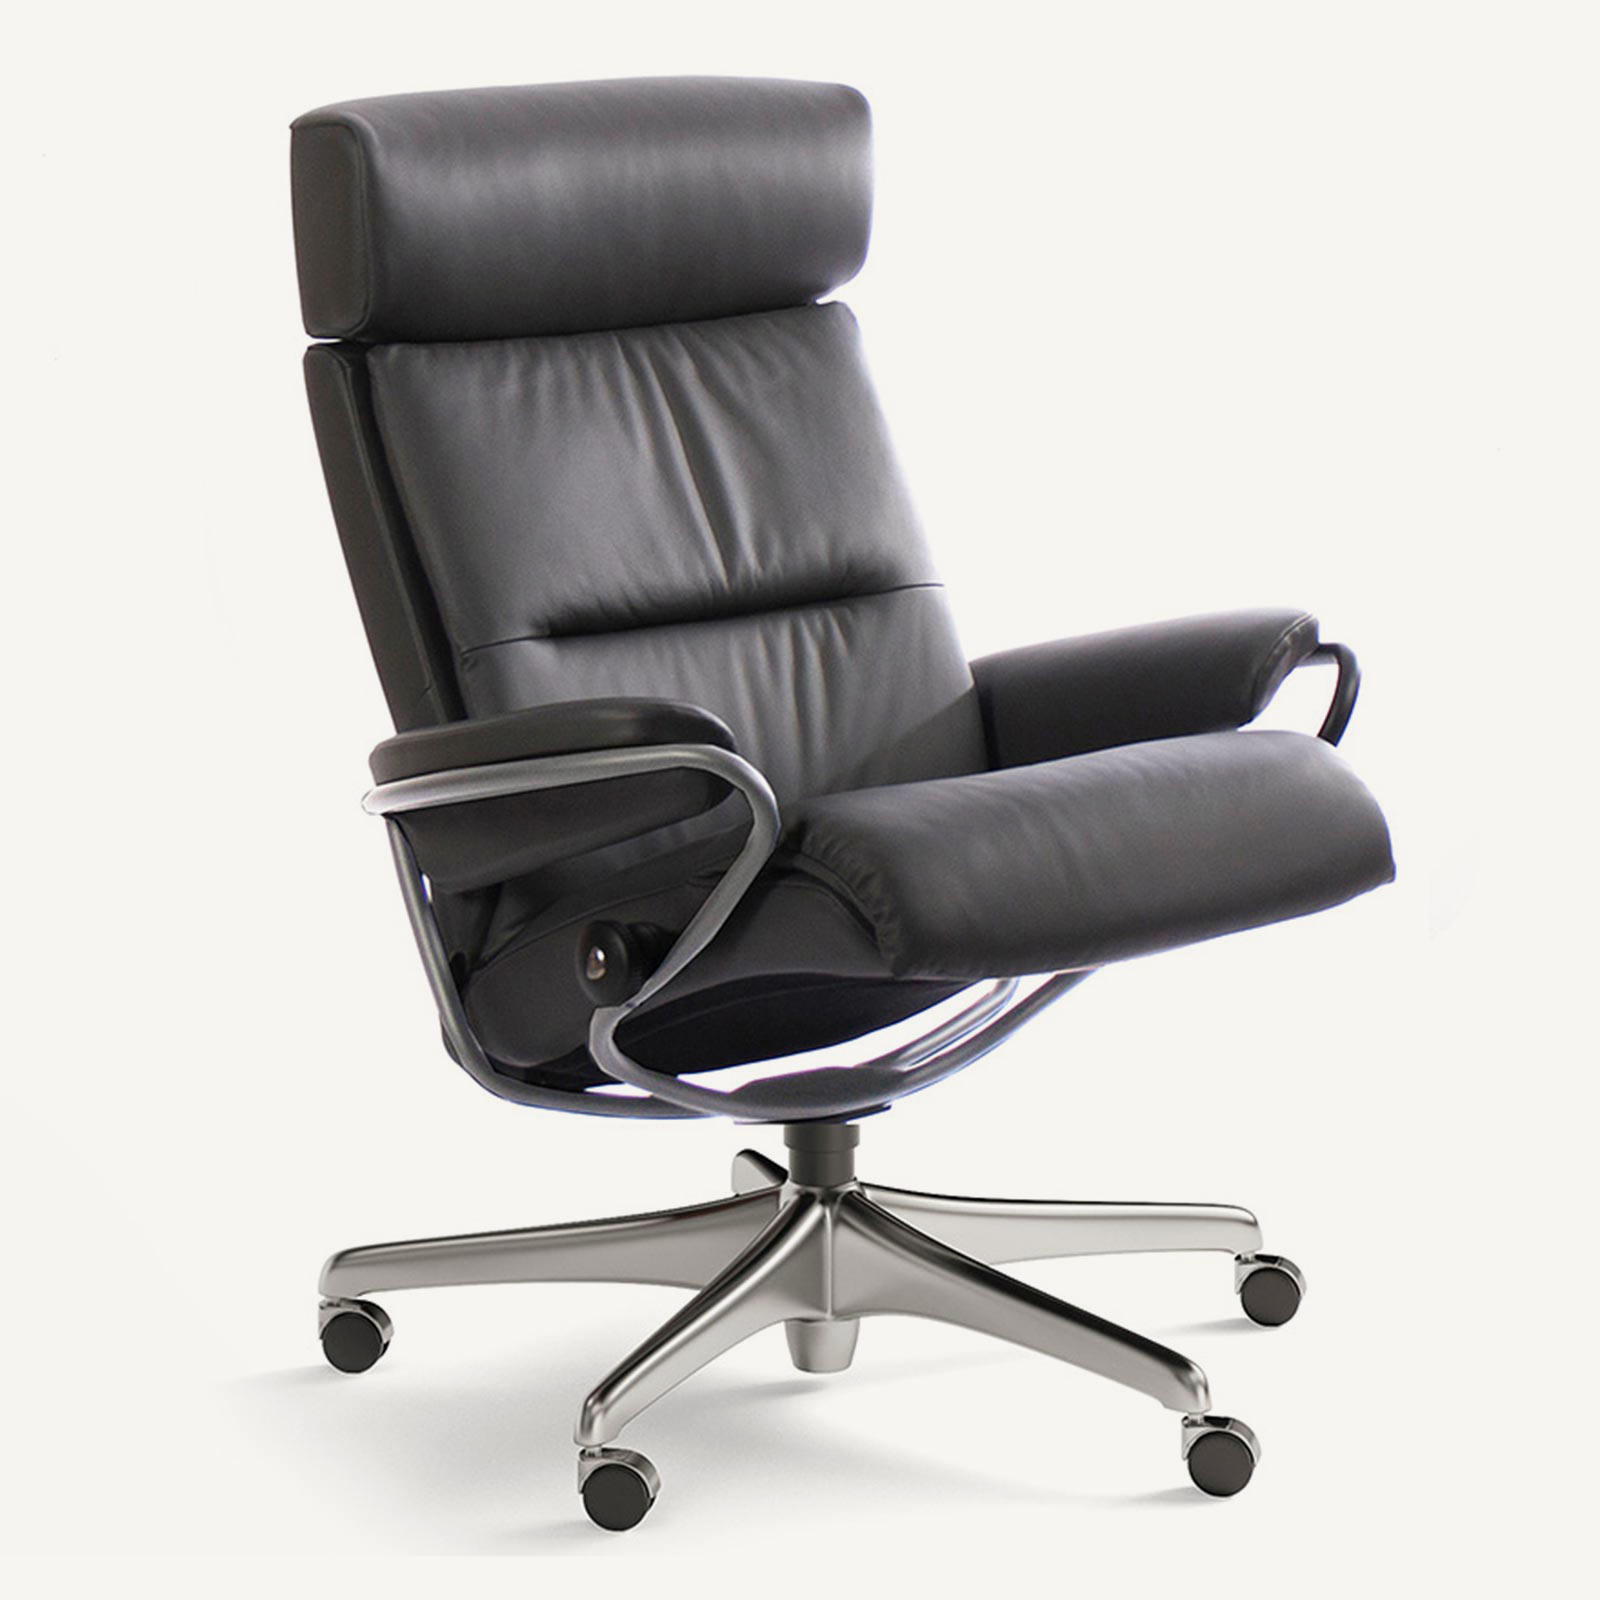 Stressless by Ekornes Home Office Tokyo Low Back Office Chair 533